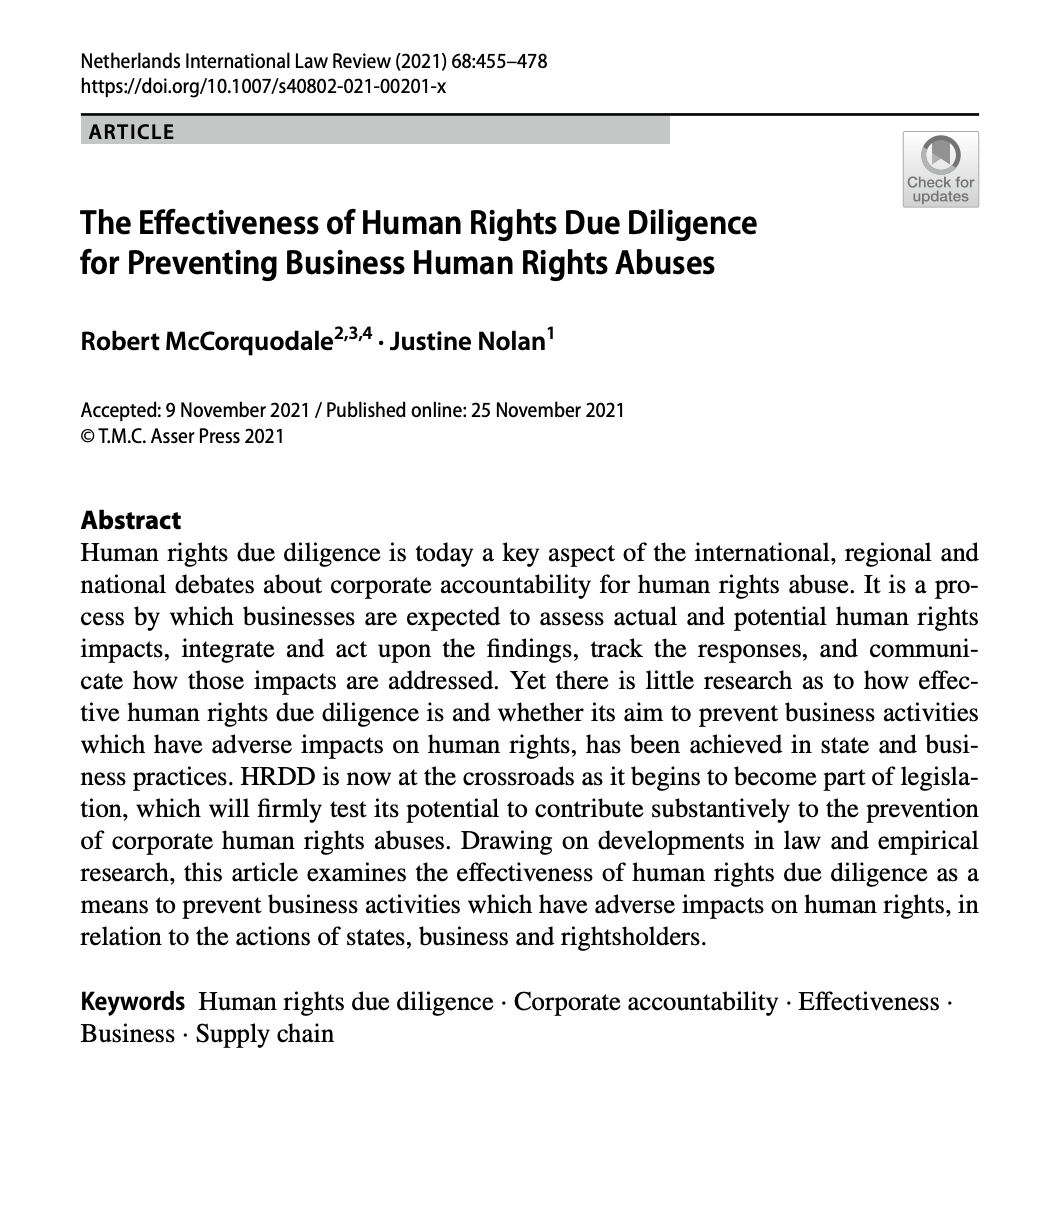 The Effectiveness of Human Rights Due Diligence for Preventing Business Human Rights Abuses